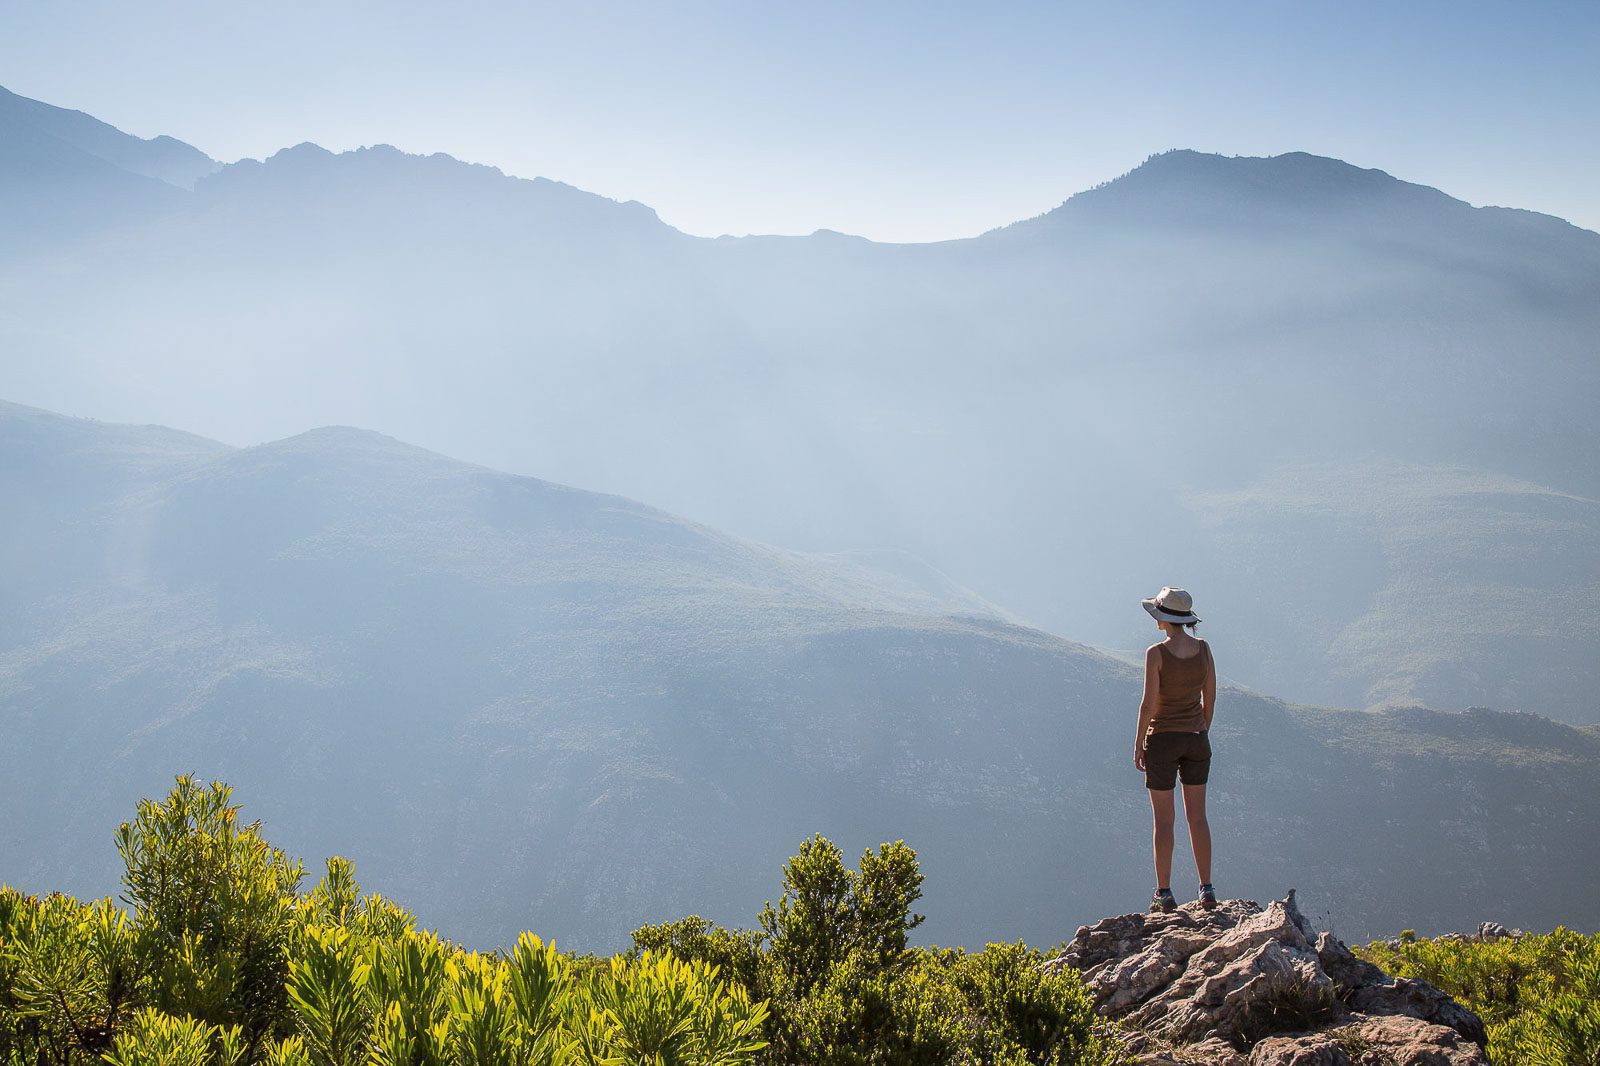 a woman hiker in a brimmed hat stands atop a rocky peak overlooking trees and towering, misty mountain ranges in the distance